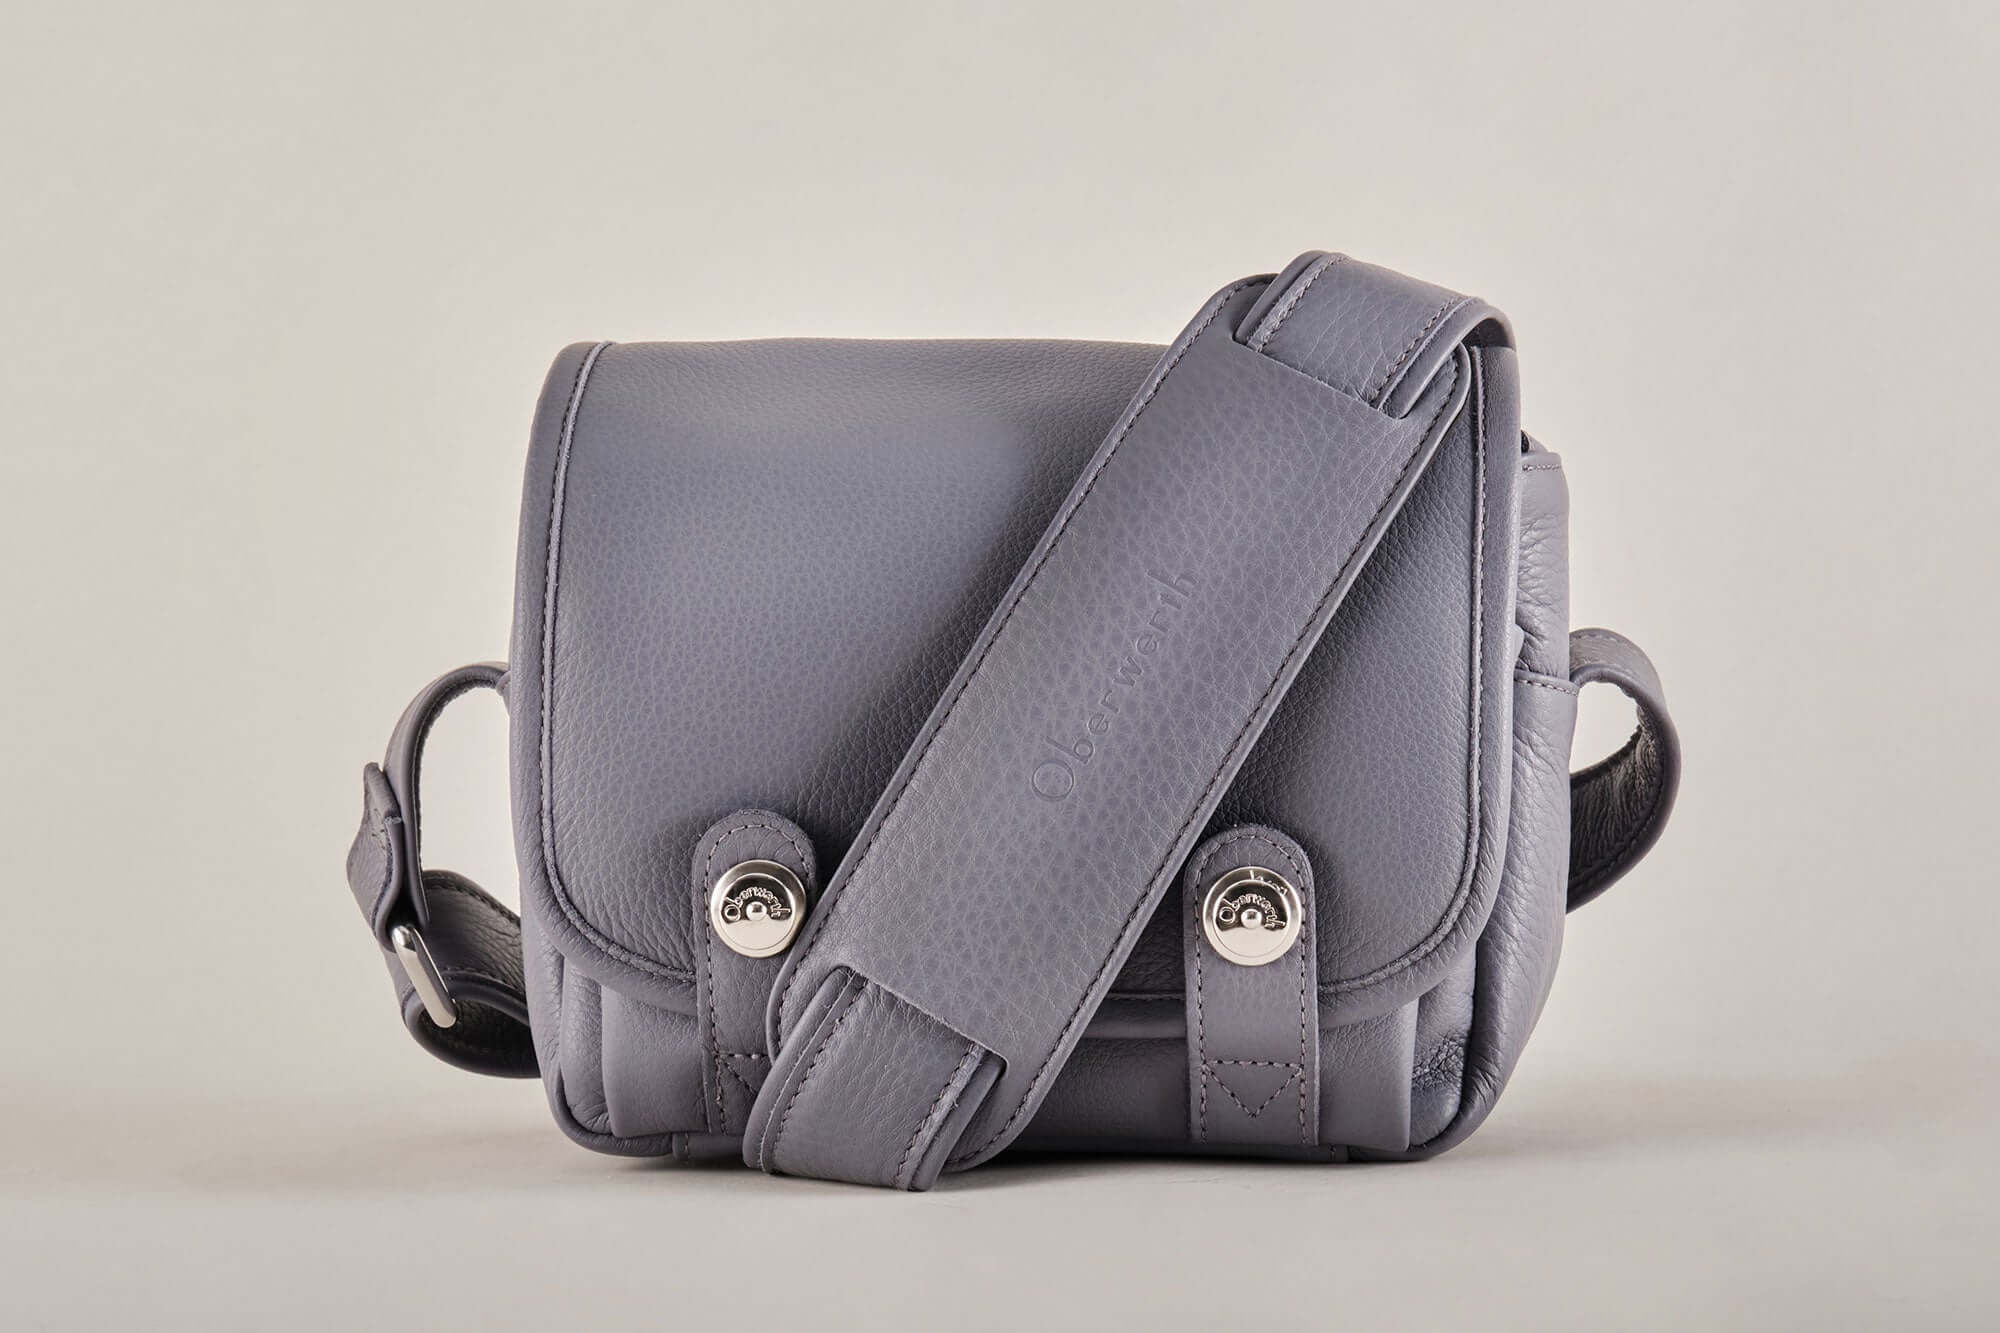 The Q Bag Casual (Phil) - Leica Q3 bag lavender !展示会グッズ！